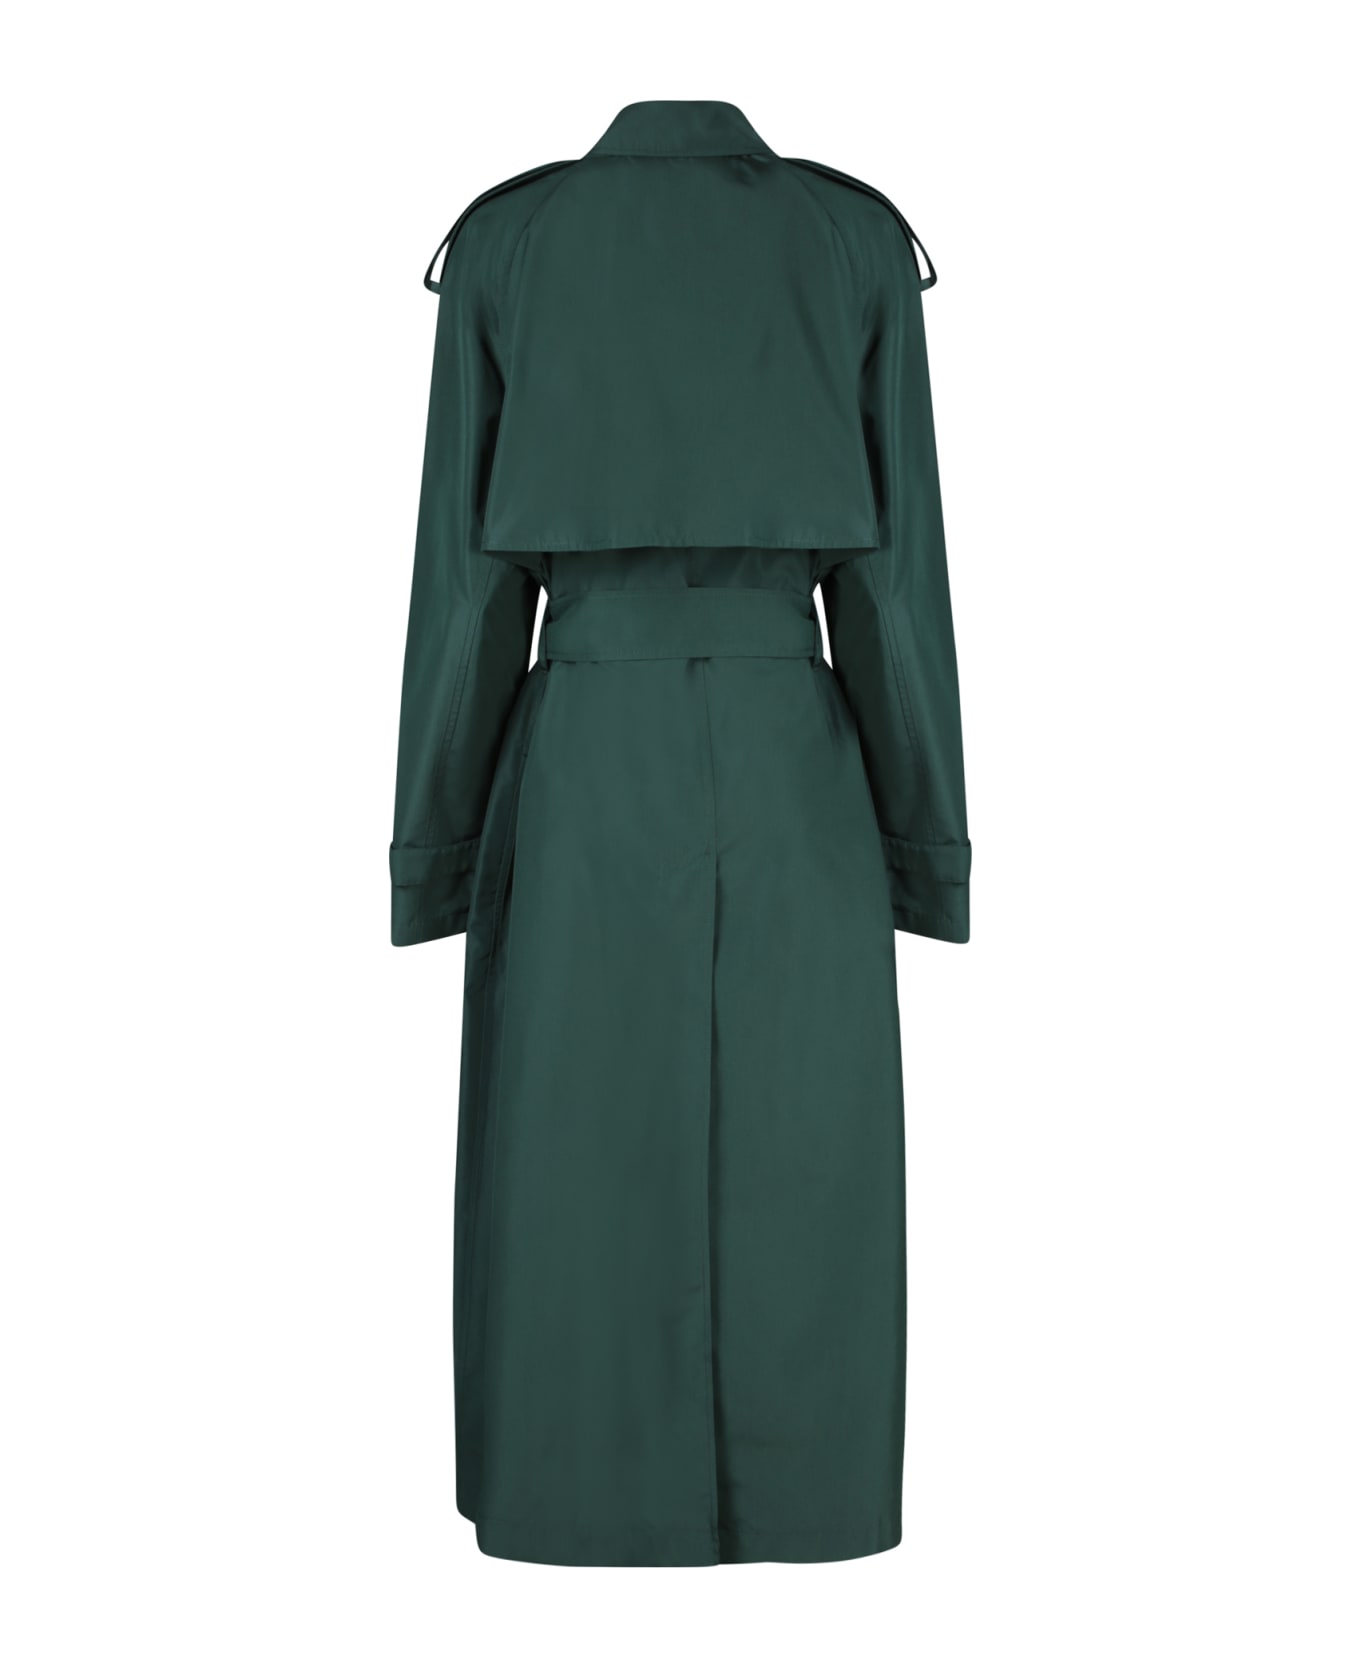 Burberry Oversize Green Trench - Green